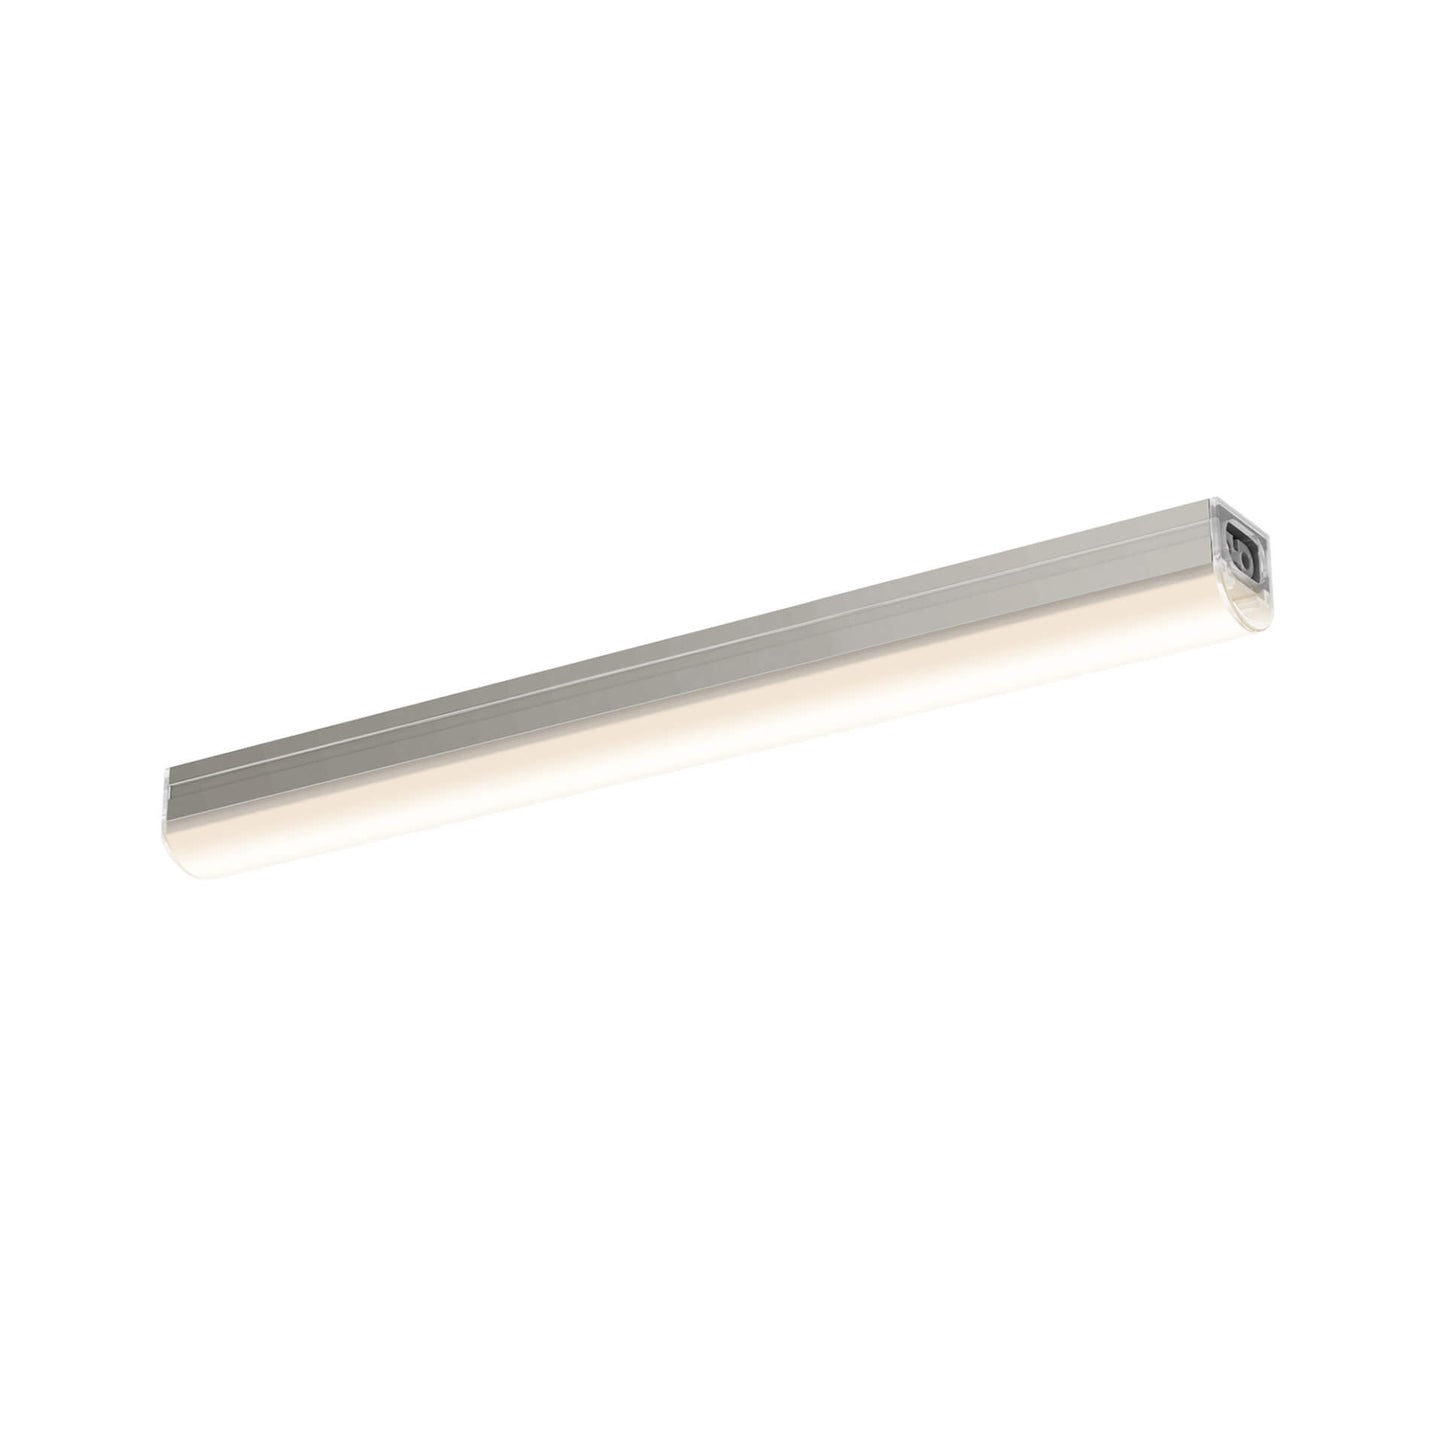 24 Inch CCT PowerLED Linear Under Cabinet Light